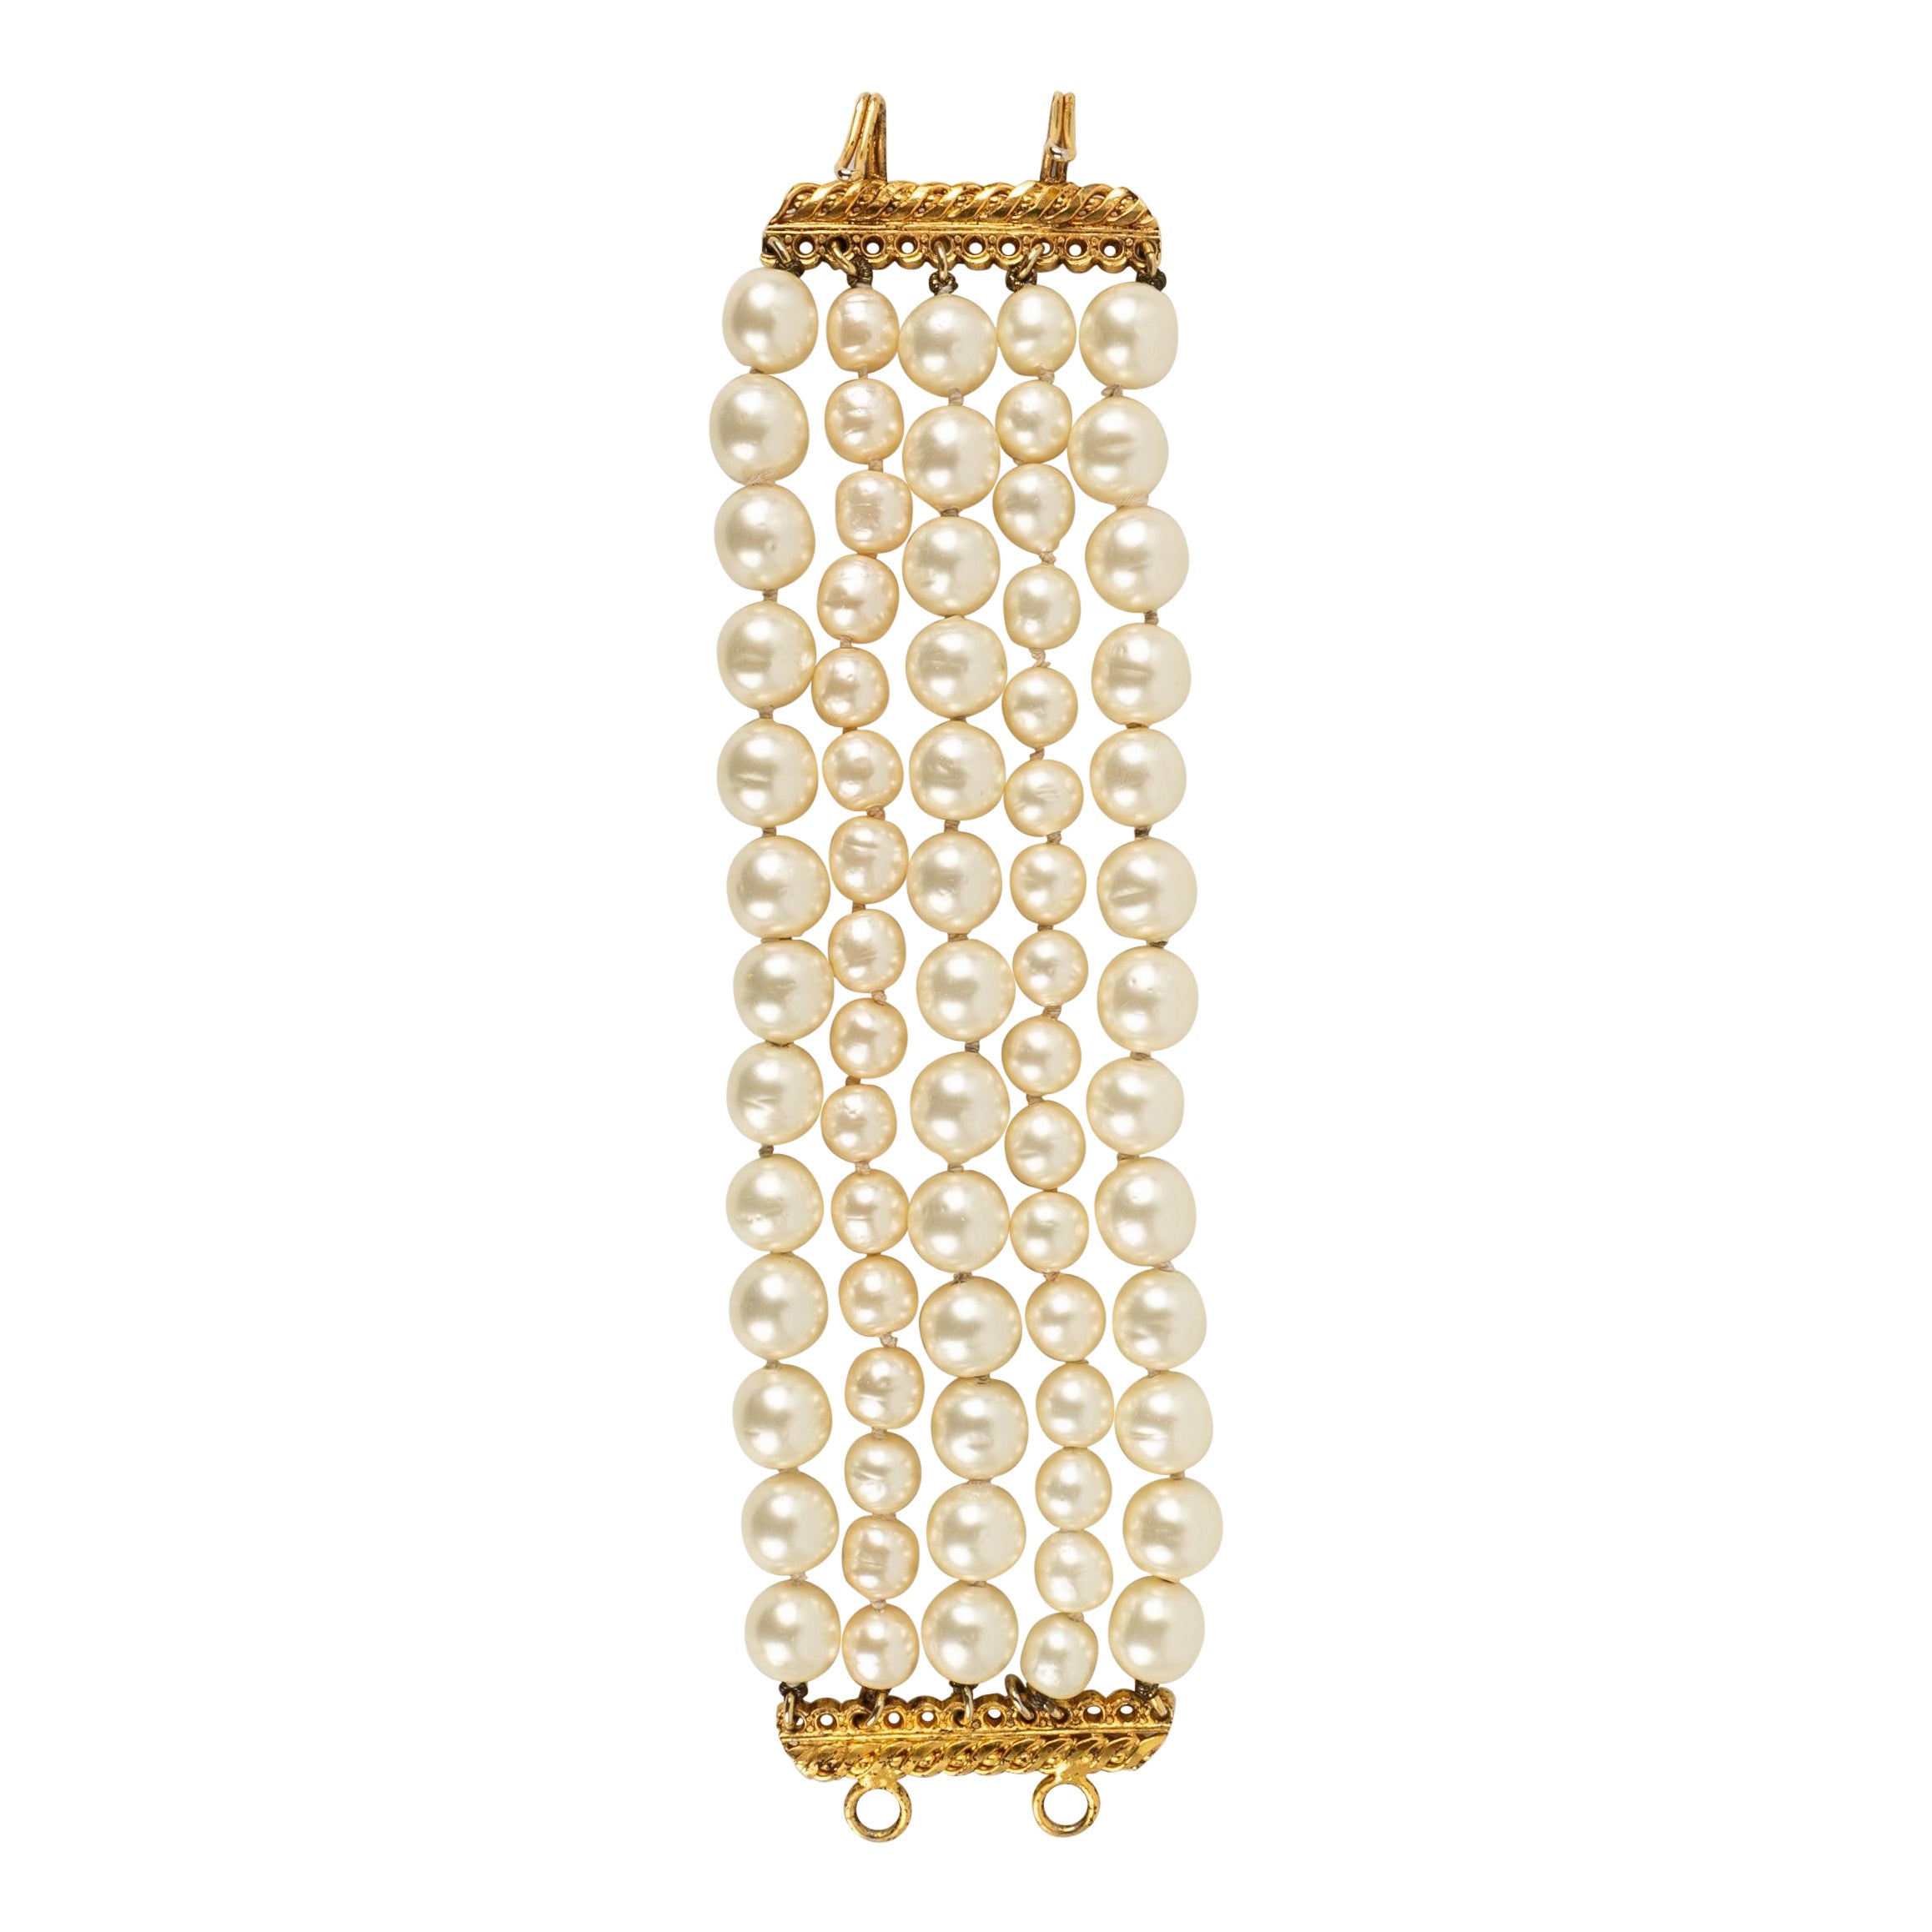 Chanel Bracelet with Pearly Beads and a Fastener in Golden Metal, 1980s For Sale